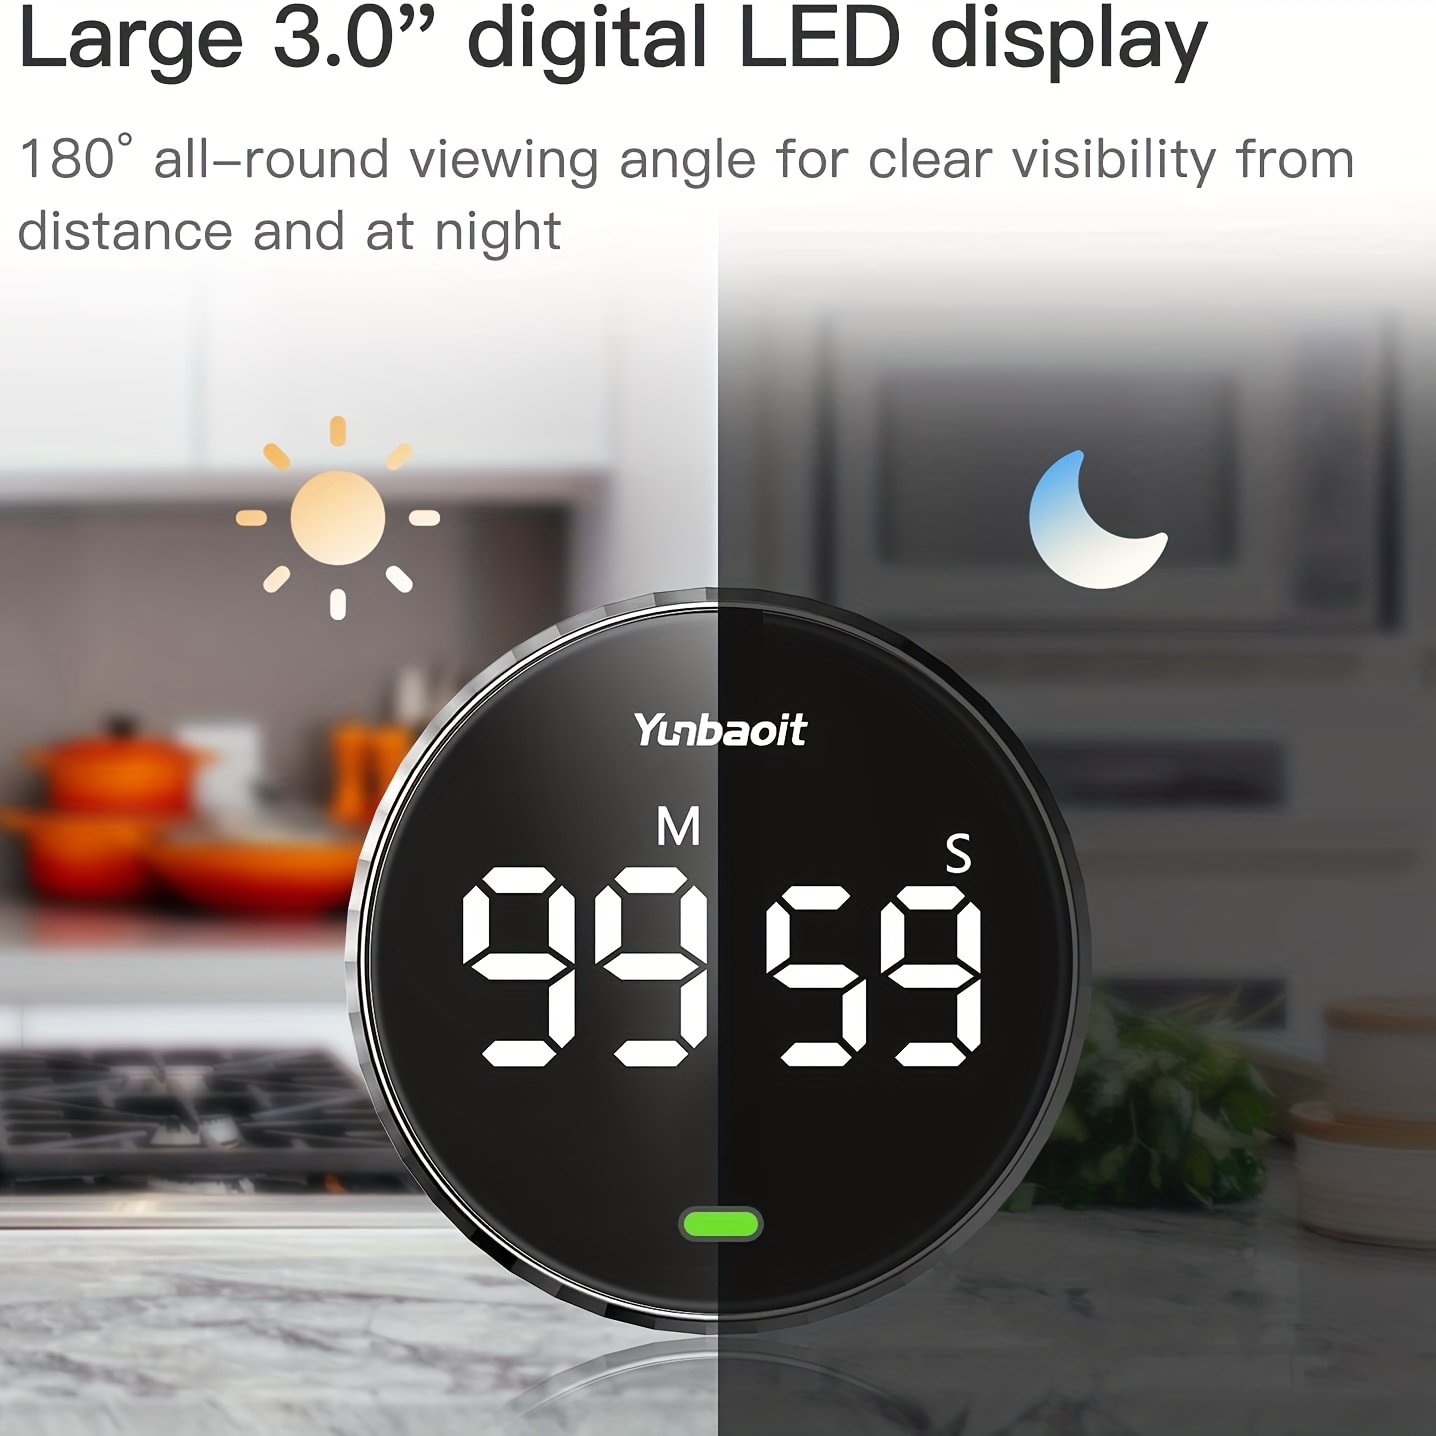 Digital Kitchen Timers, Visual timers Large LED Display Magnetic